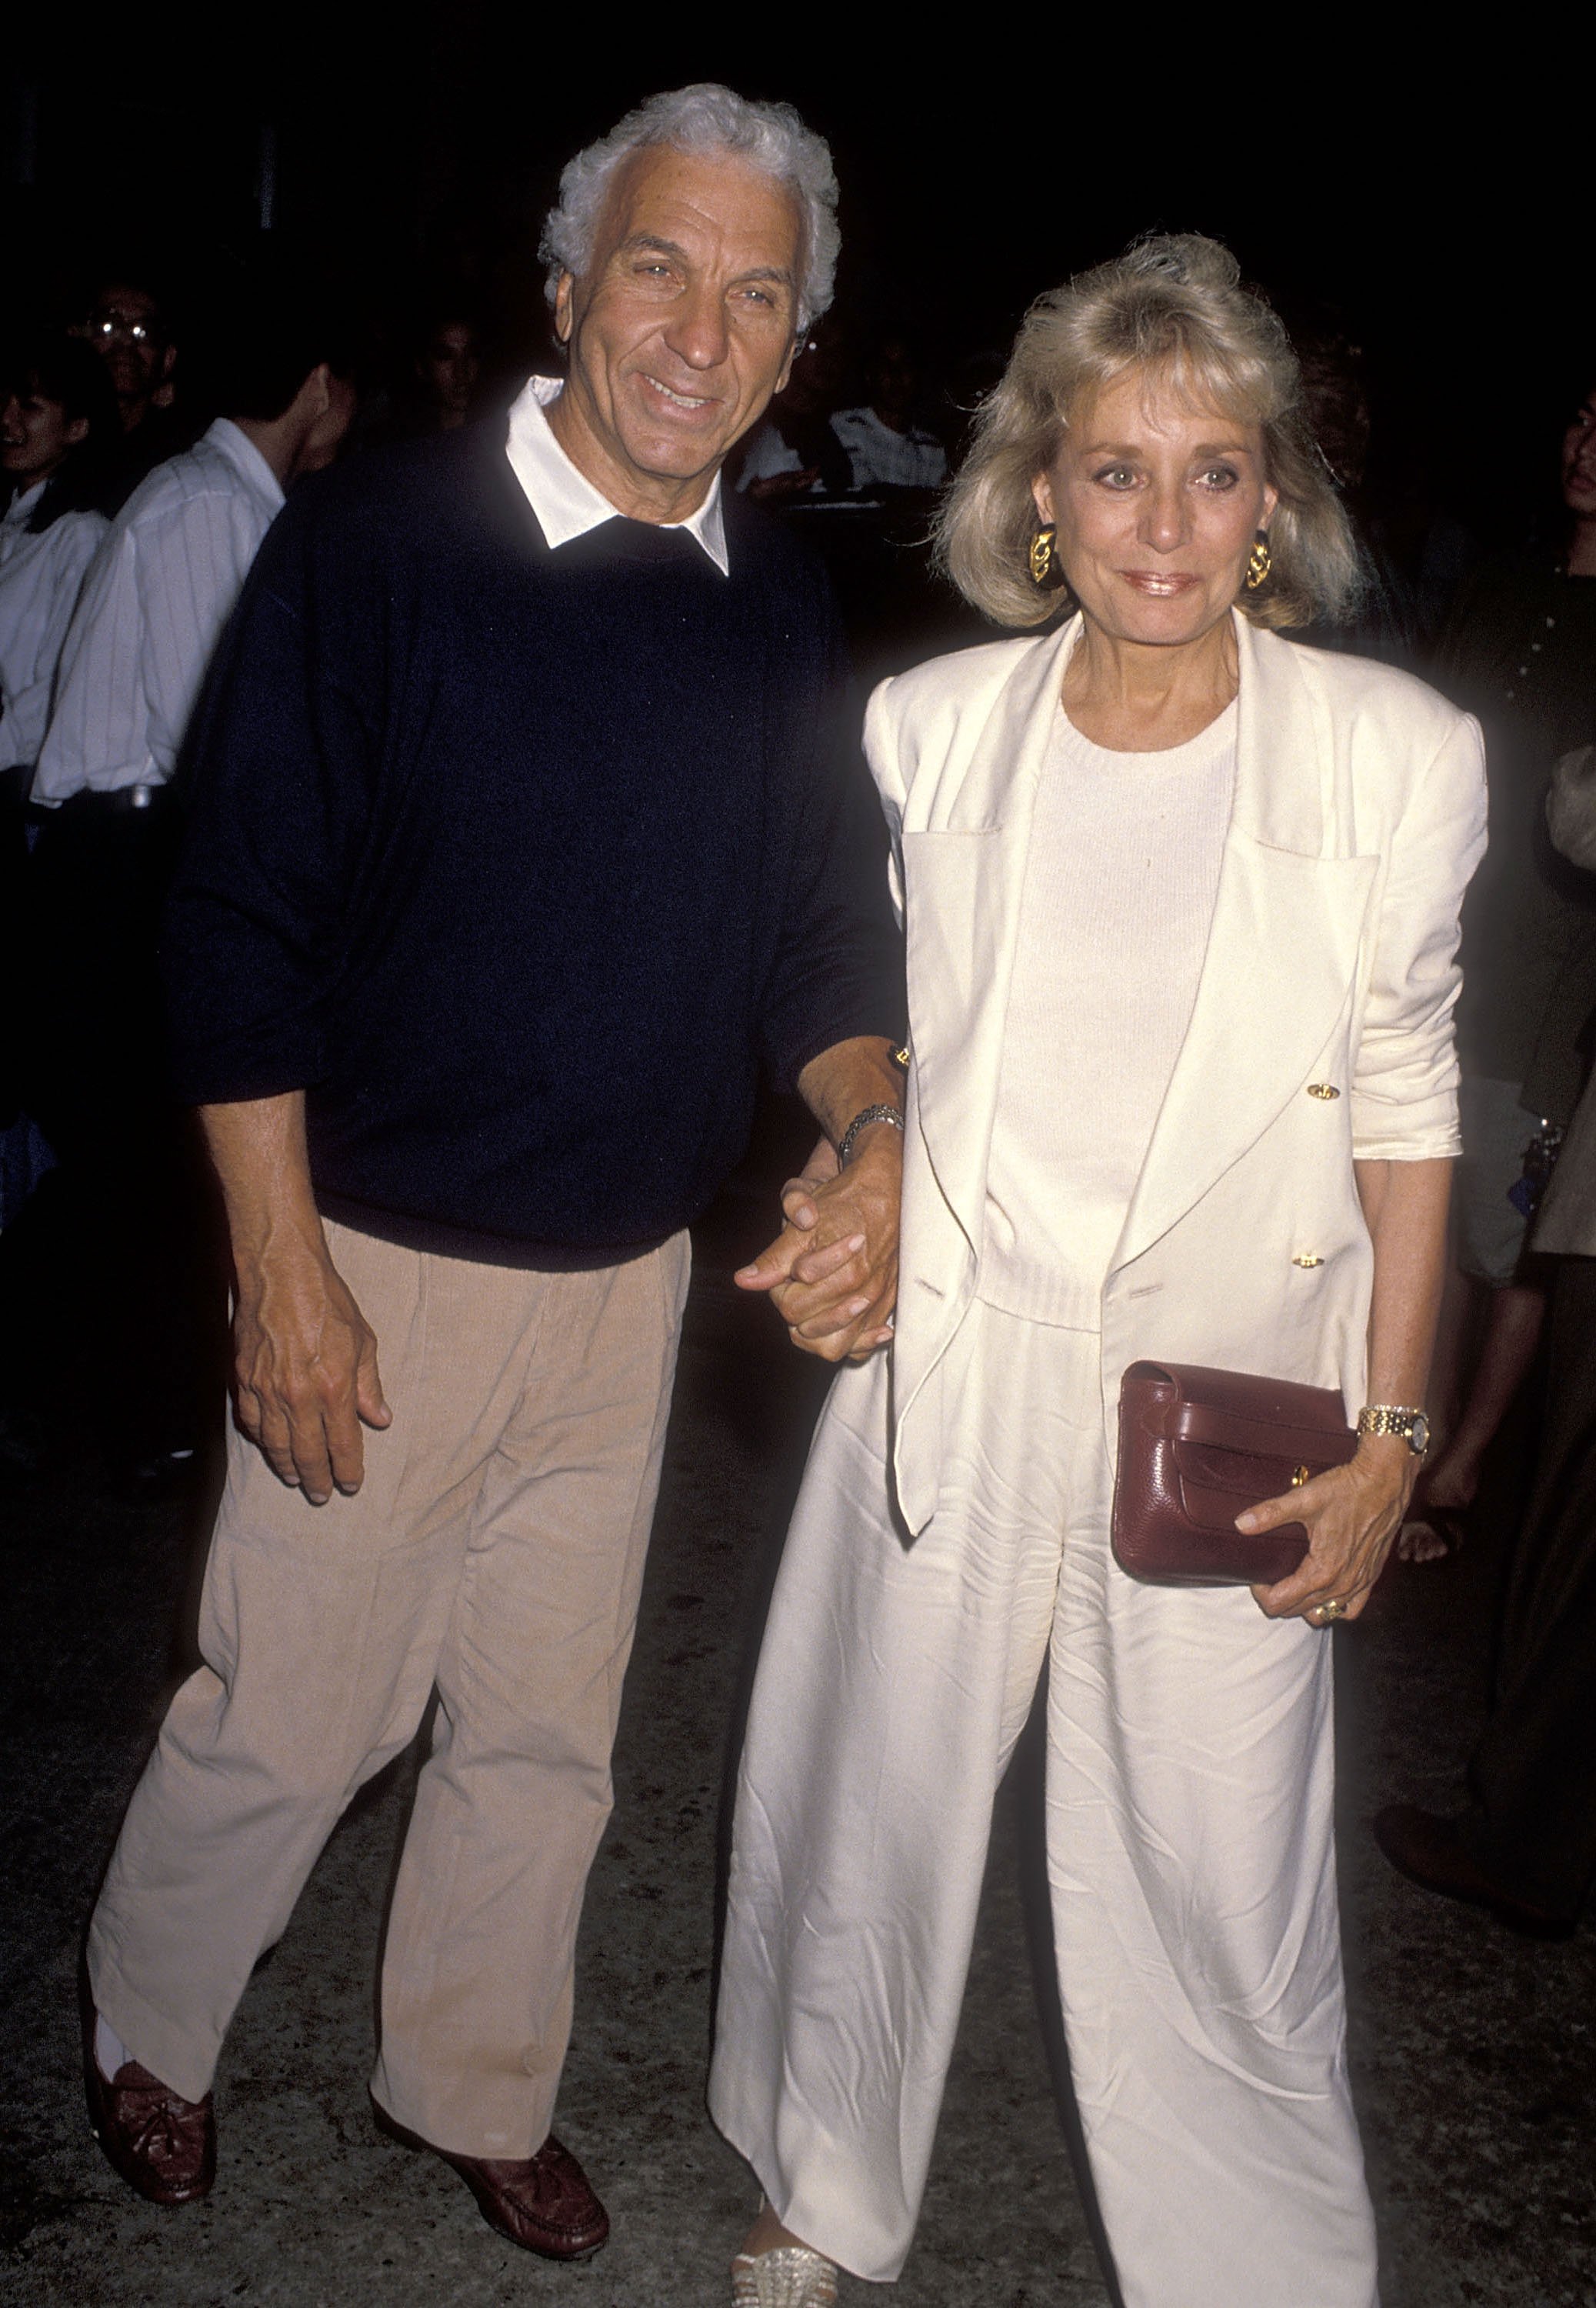 Entertainment executive Merv Adelson and TV journalist Barbara Walters at the "Presumed Innocent" Westwood Premiere on July 25, 1990 at the Mann Bruin Theatre in Westwood, California. | Source: Getty Images